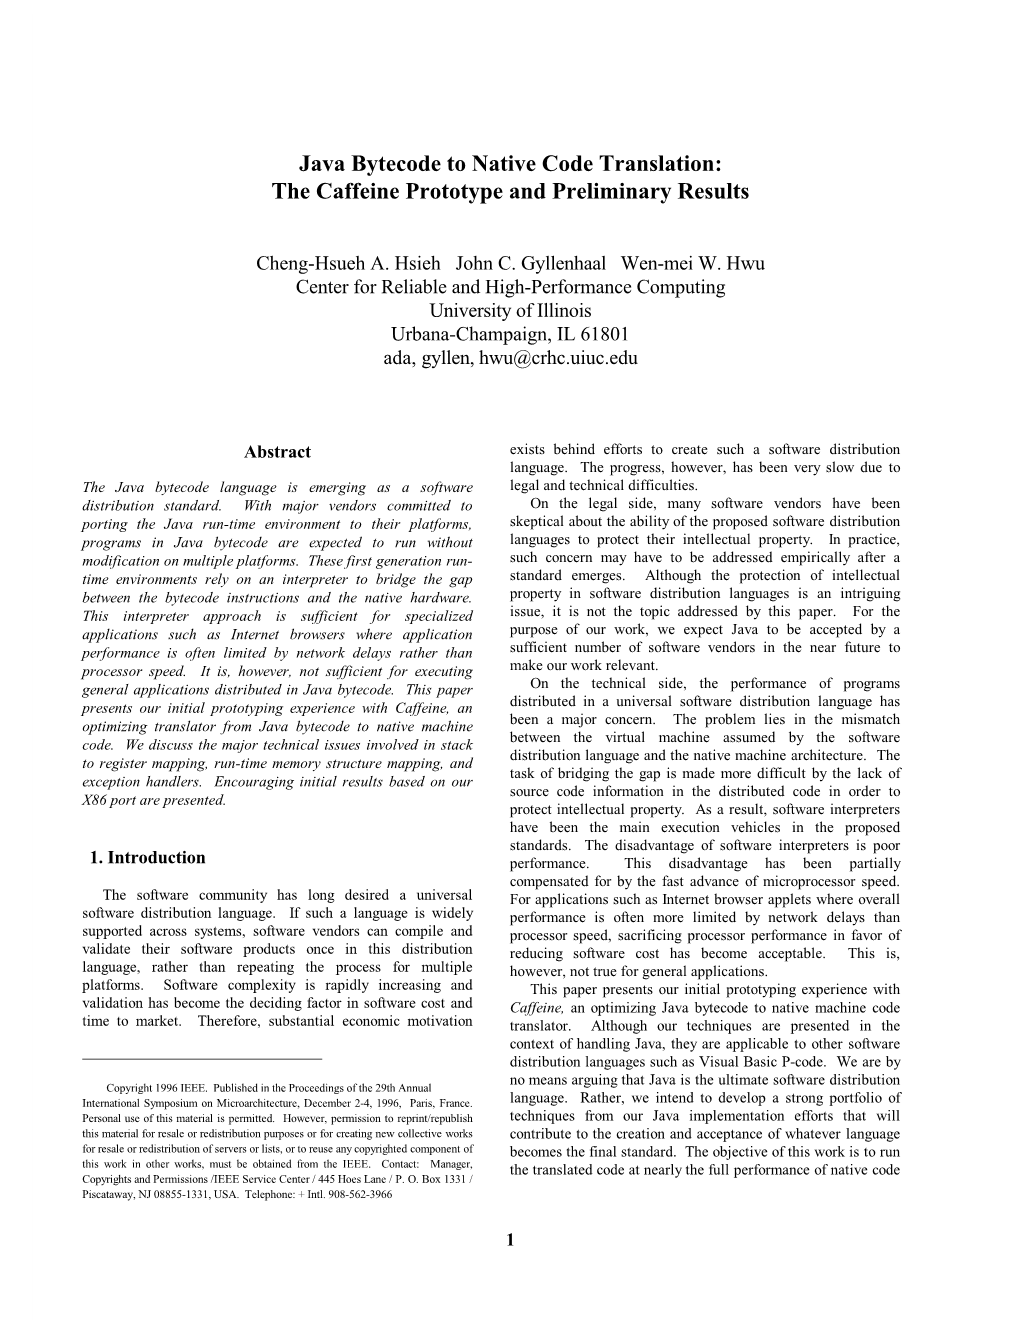 Java Bytecode to Native Code Translation: the Caffeine Prototype and Preliminary Results